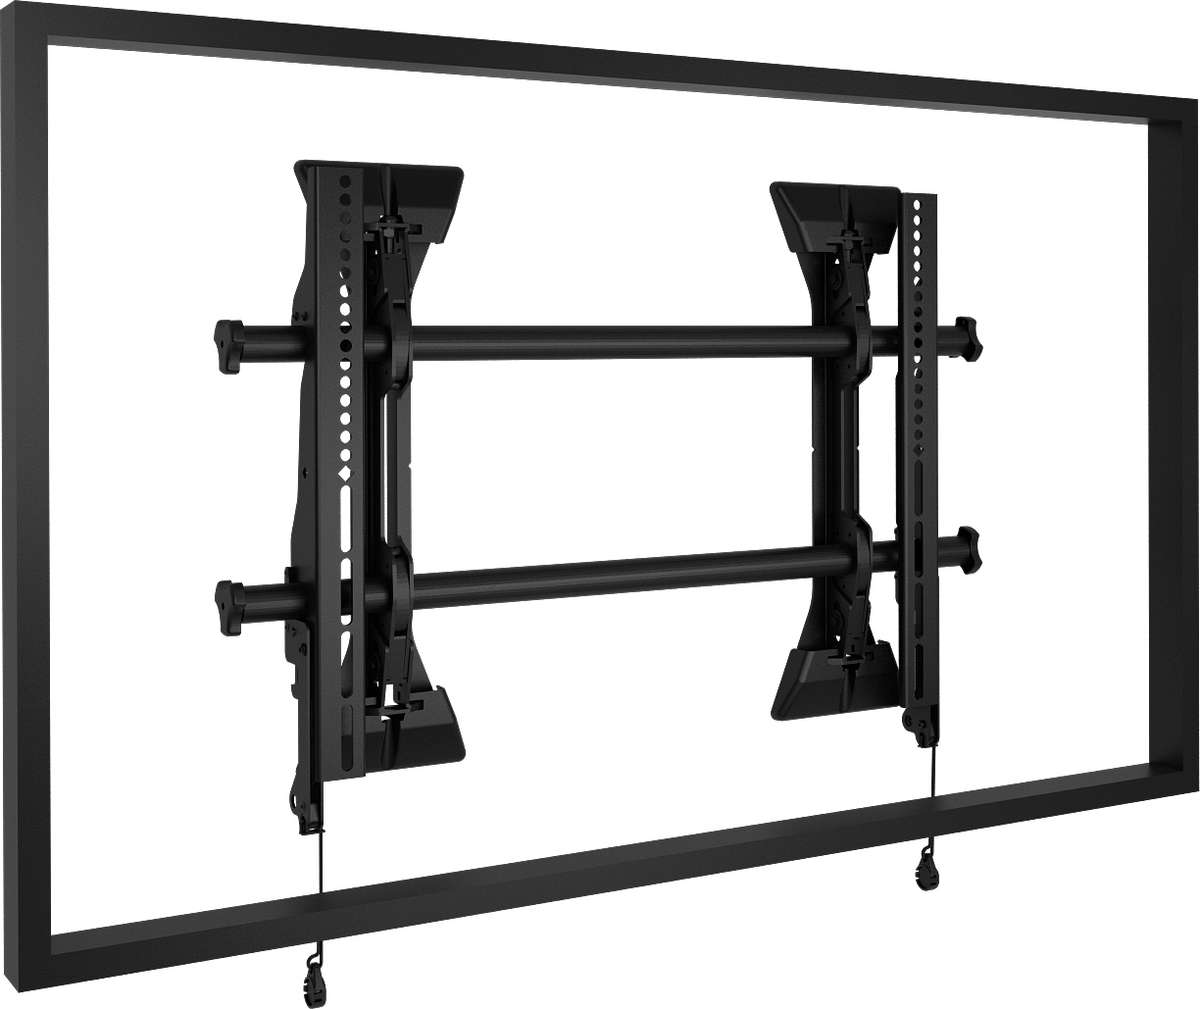 Chief MSM1U Medium Fusion Micro-Adjustable Fixed Wall Mount for 32-65" monitors product image. Click to enlarge.